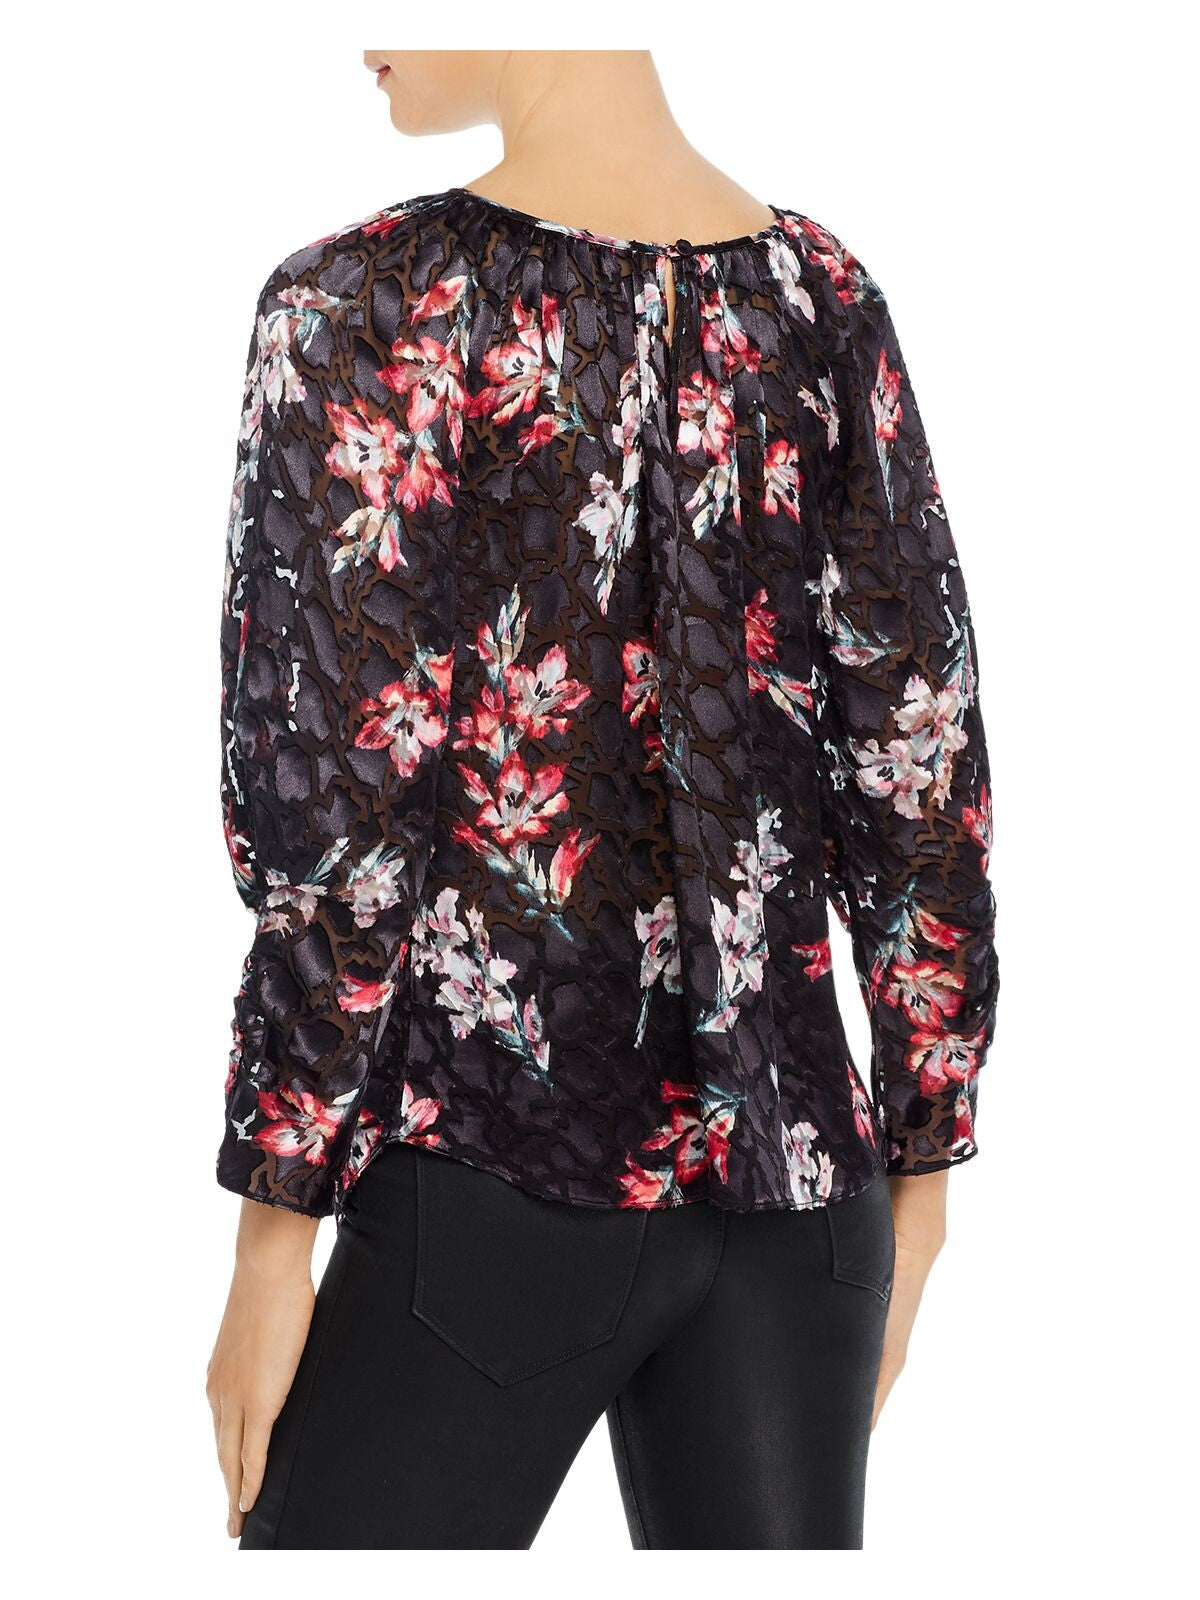 REBECCA TAYLOR Womens Black Sheer Floral Long Sleeve Keyhole Wear To Work Blouse 6